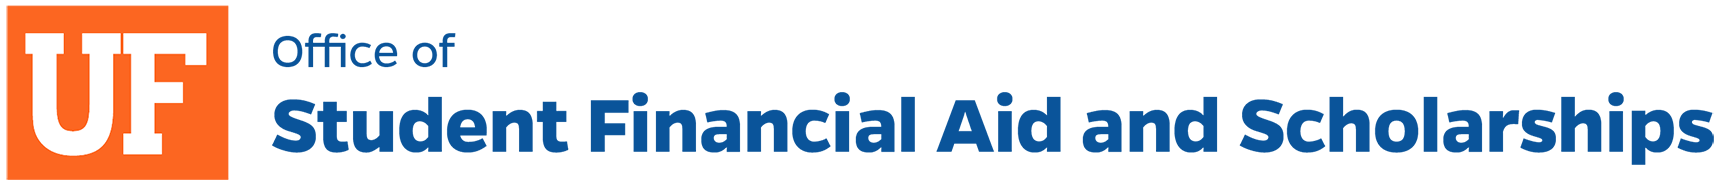 UF Office for Student Financial Affairs Logo